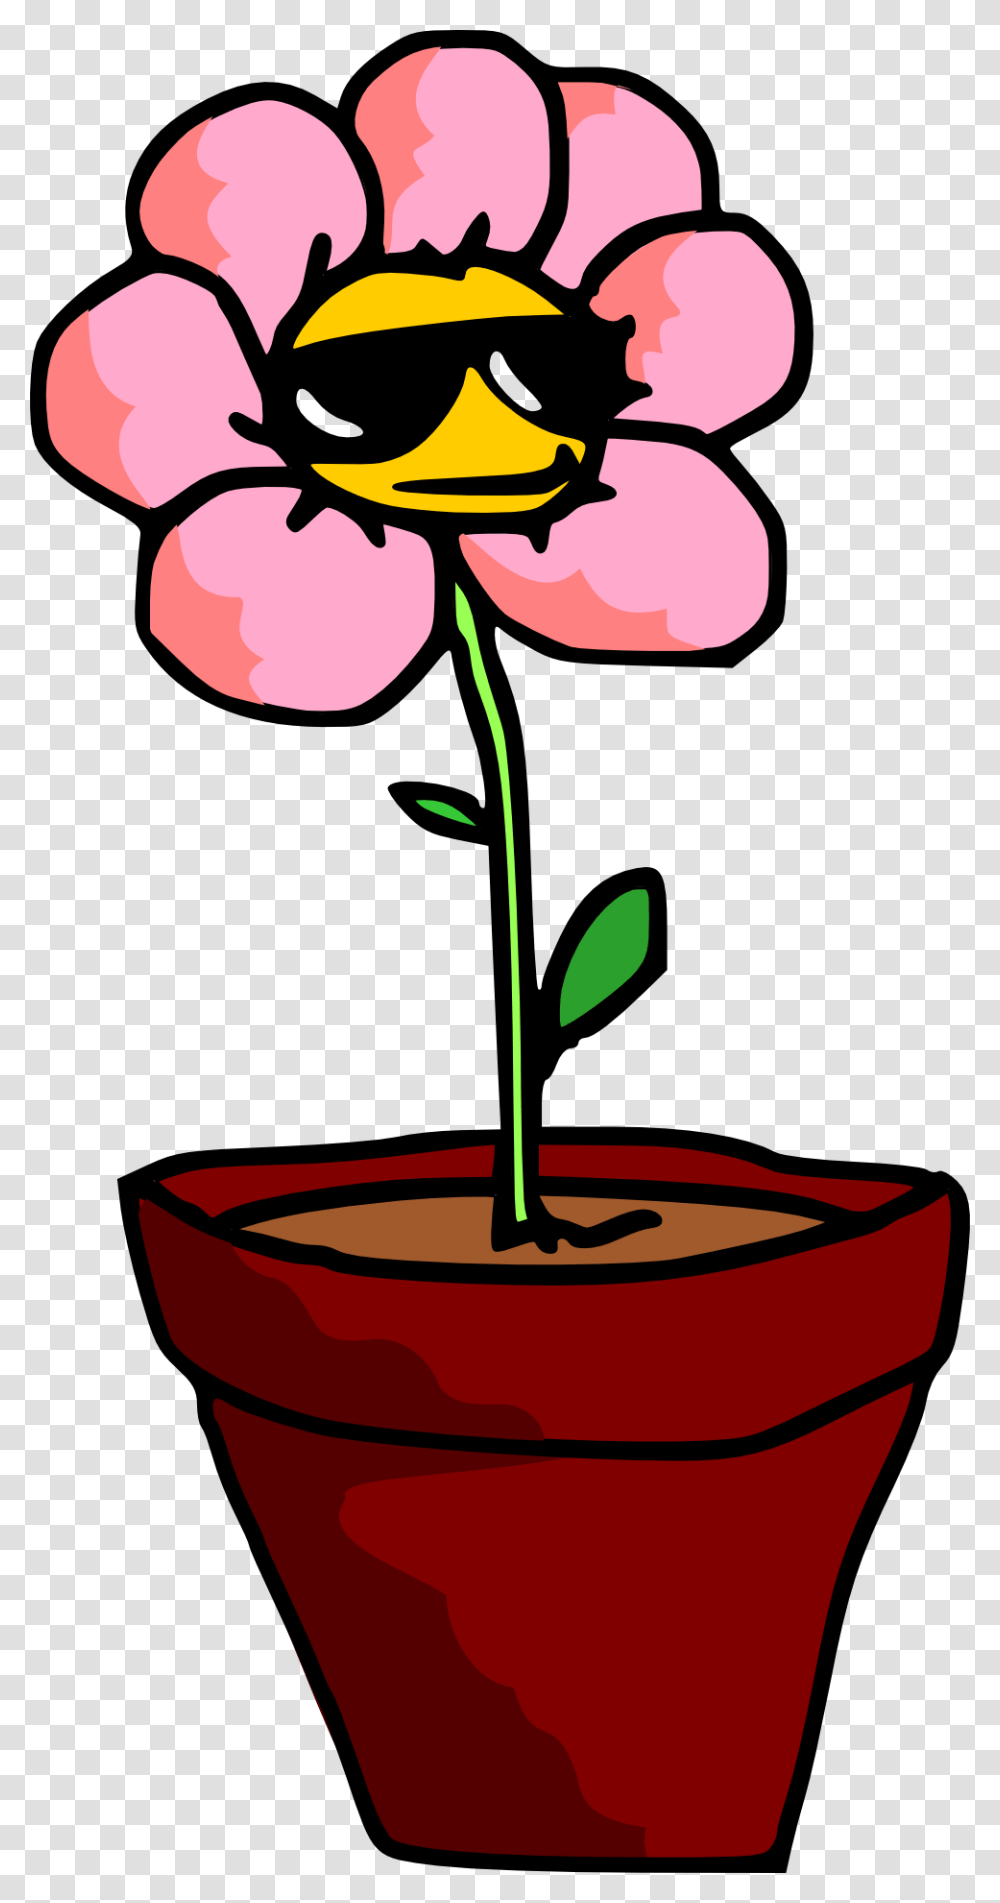 Potted Plants And Flowers Cartoon Potted Plant, Blossom, Petal, Rose Transparent Png